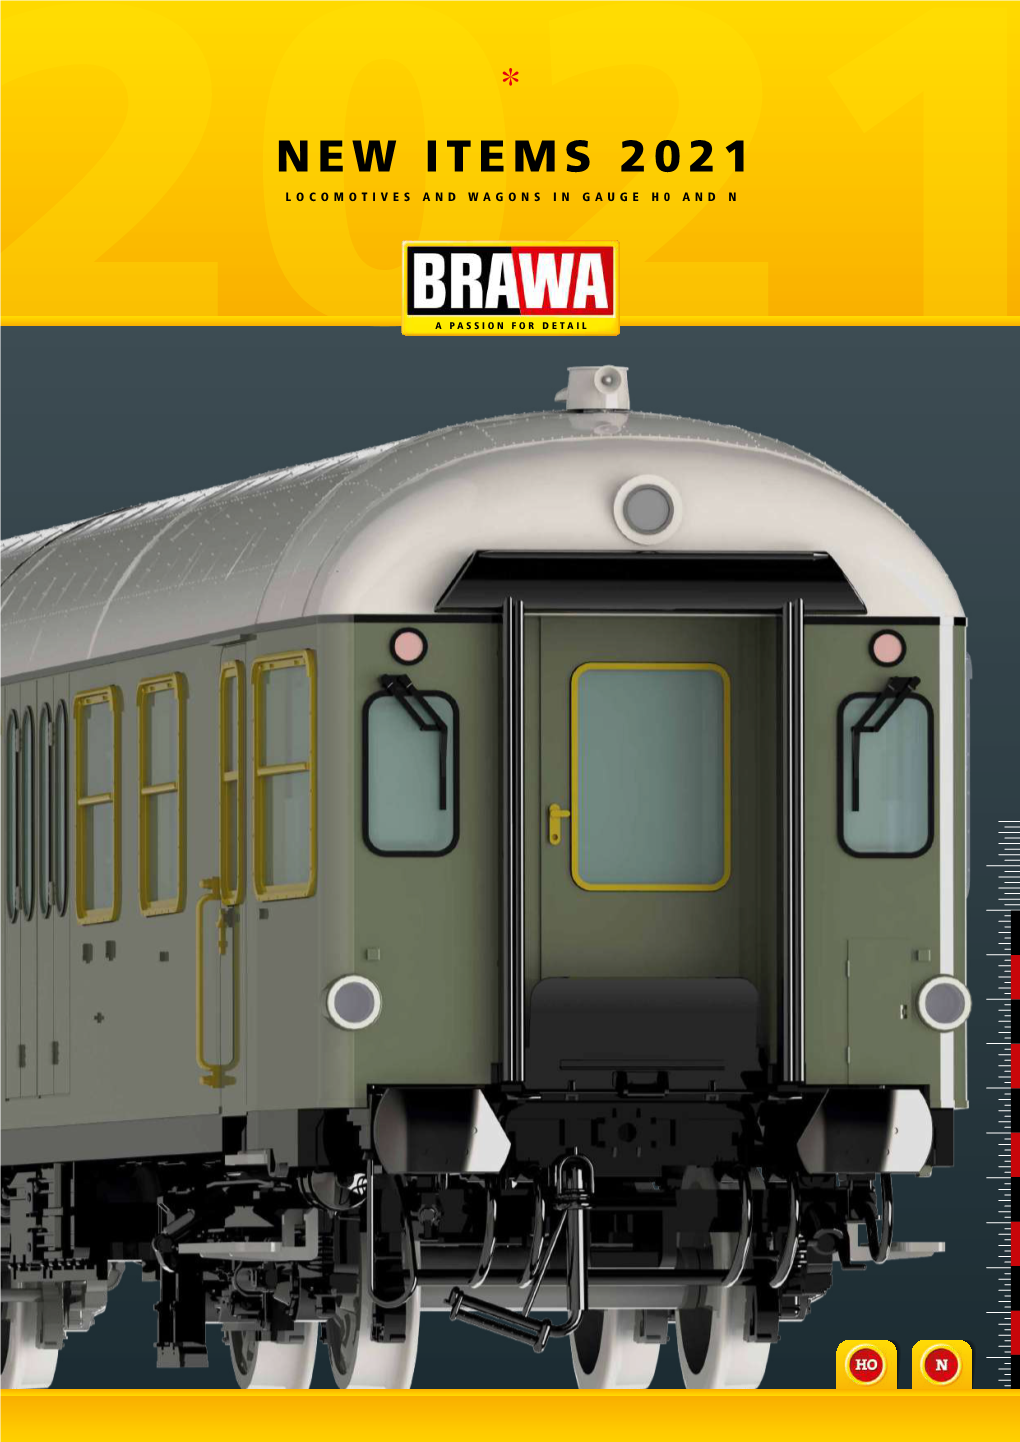 New Items 2021 Locomotives and Wagons in Gauge H0 and N